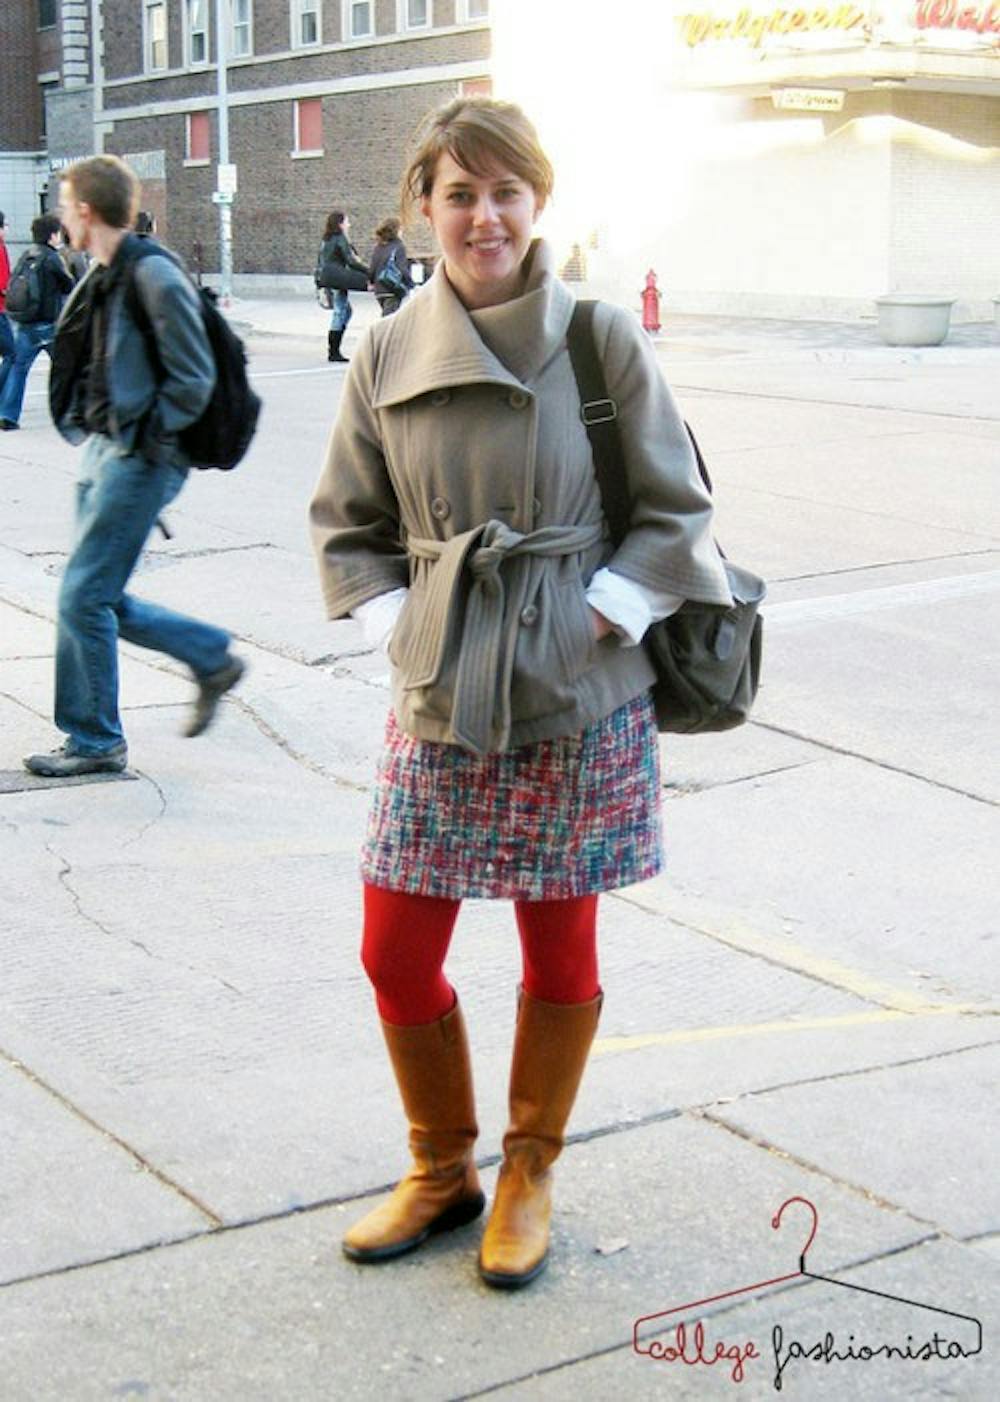 College Fashionista: Let your legs do the talking around campus